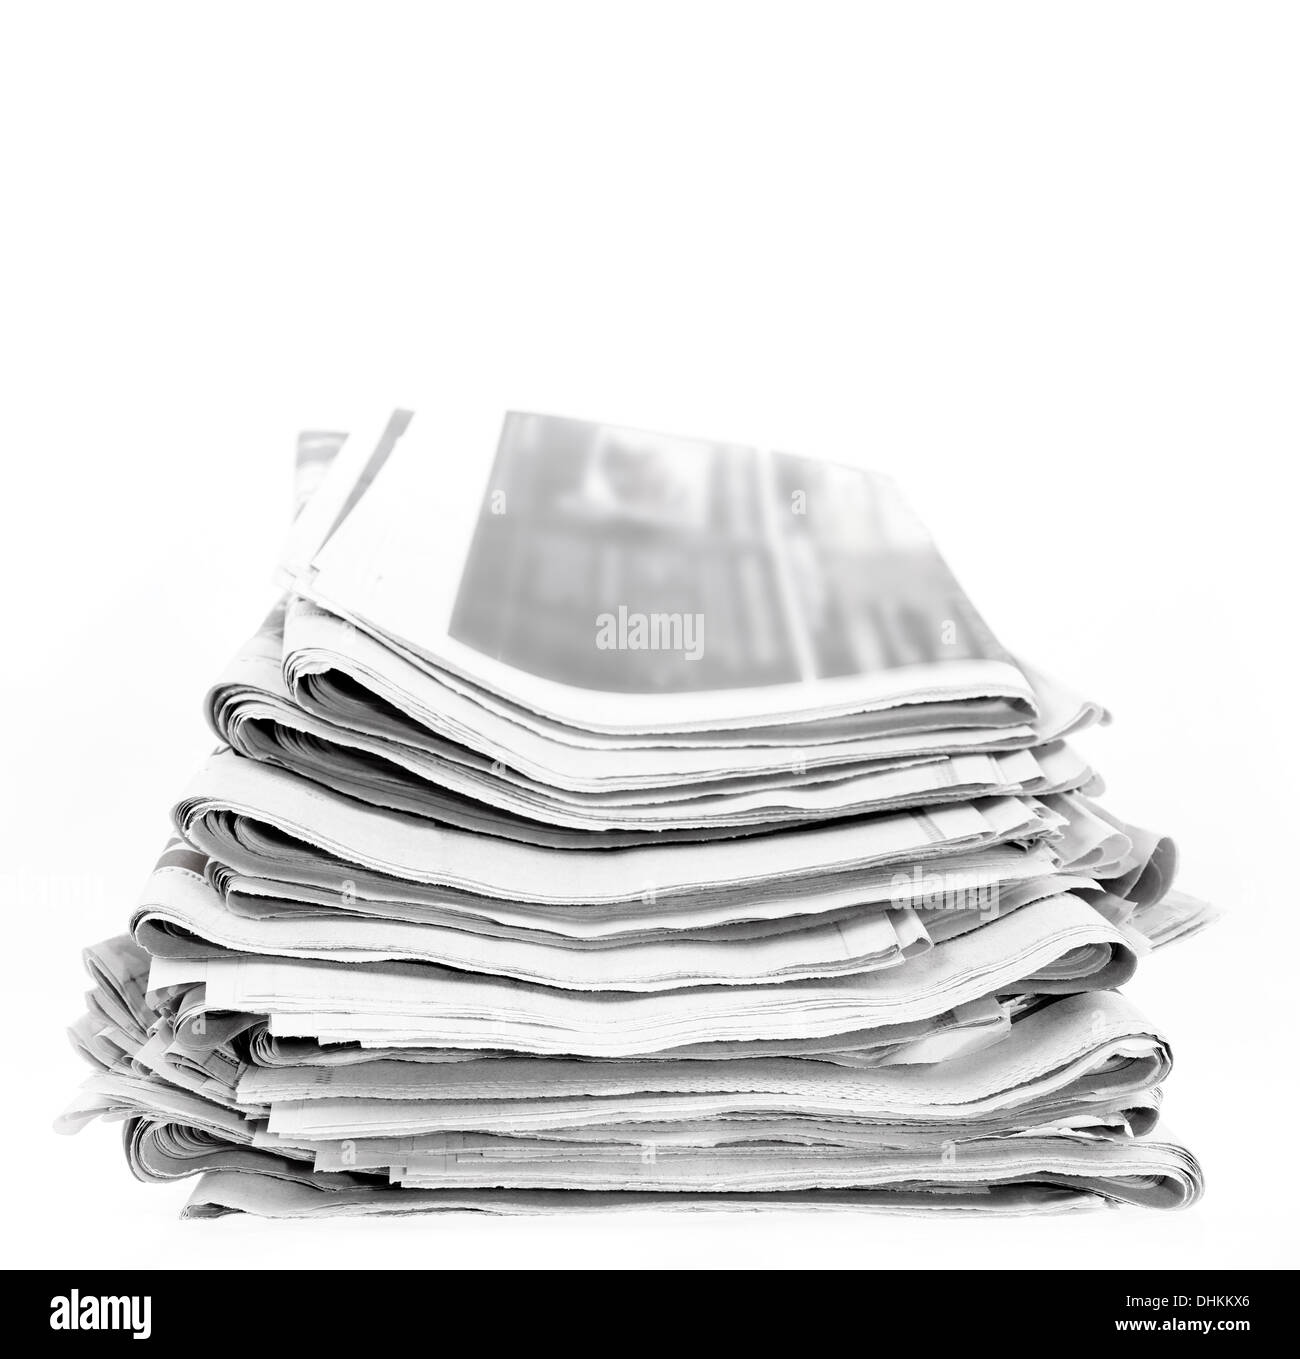 Closeup of newspapers on plain background Stock Photo